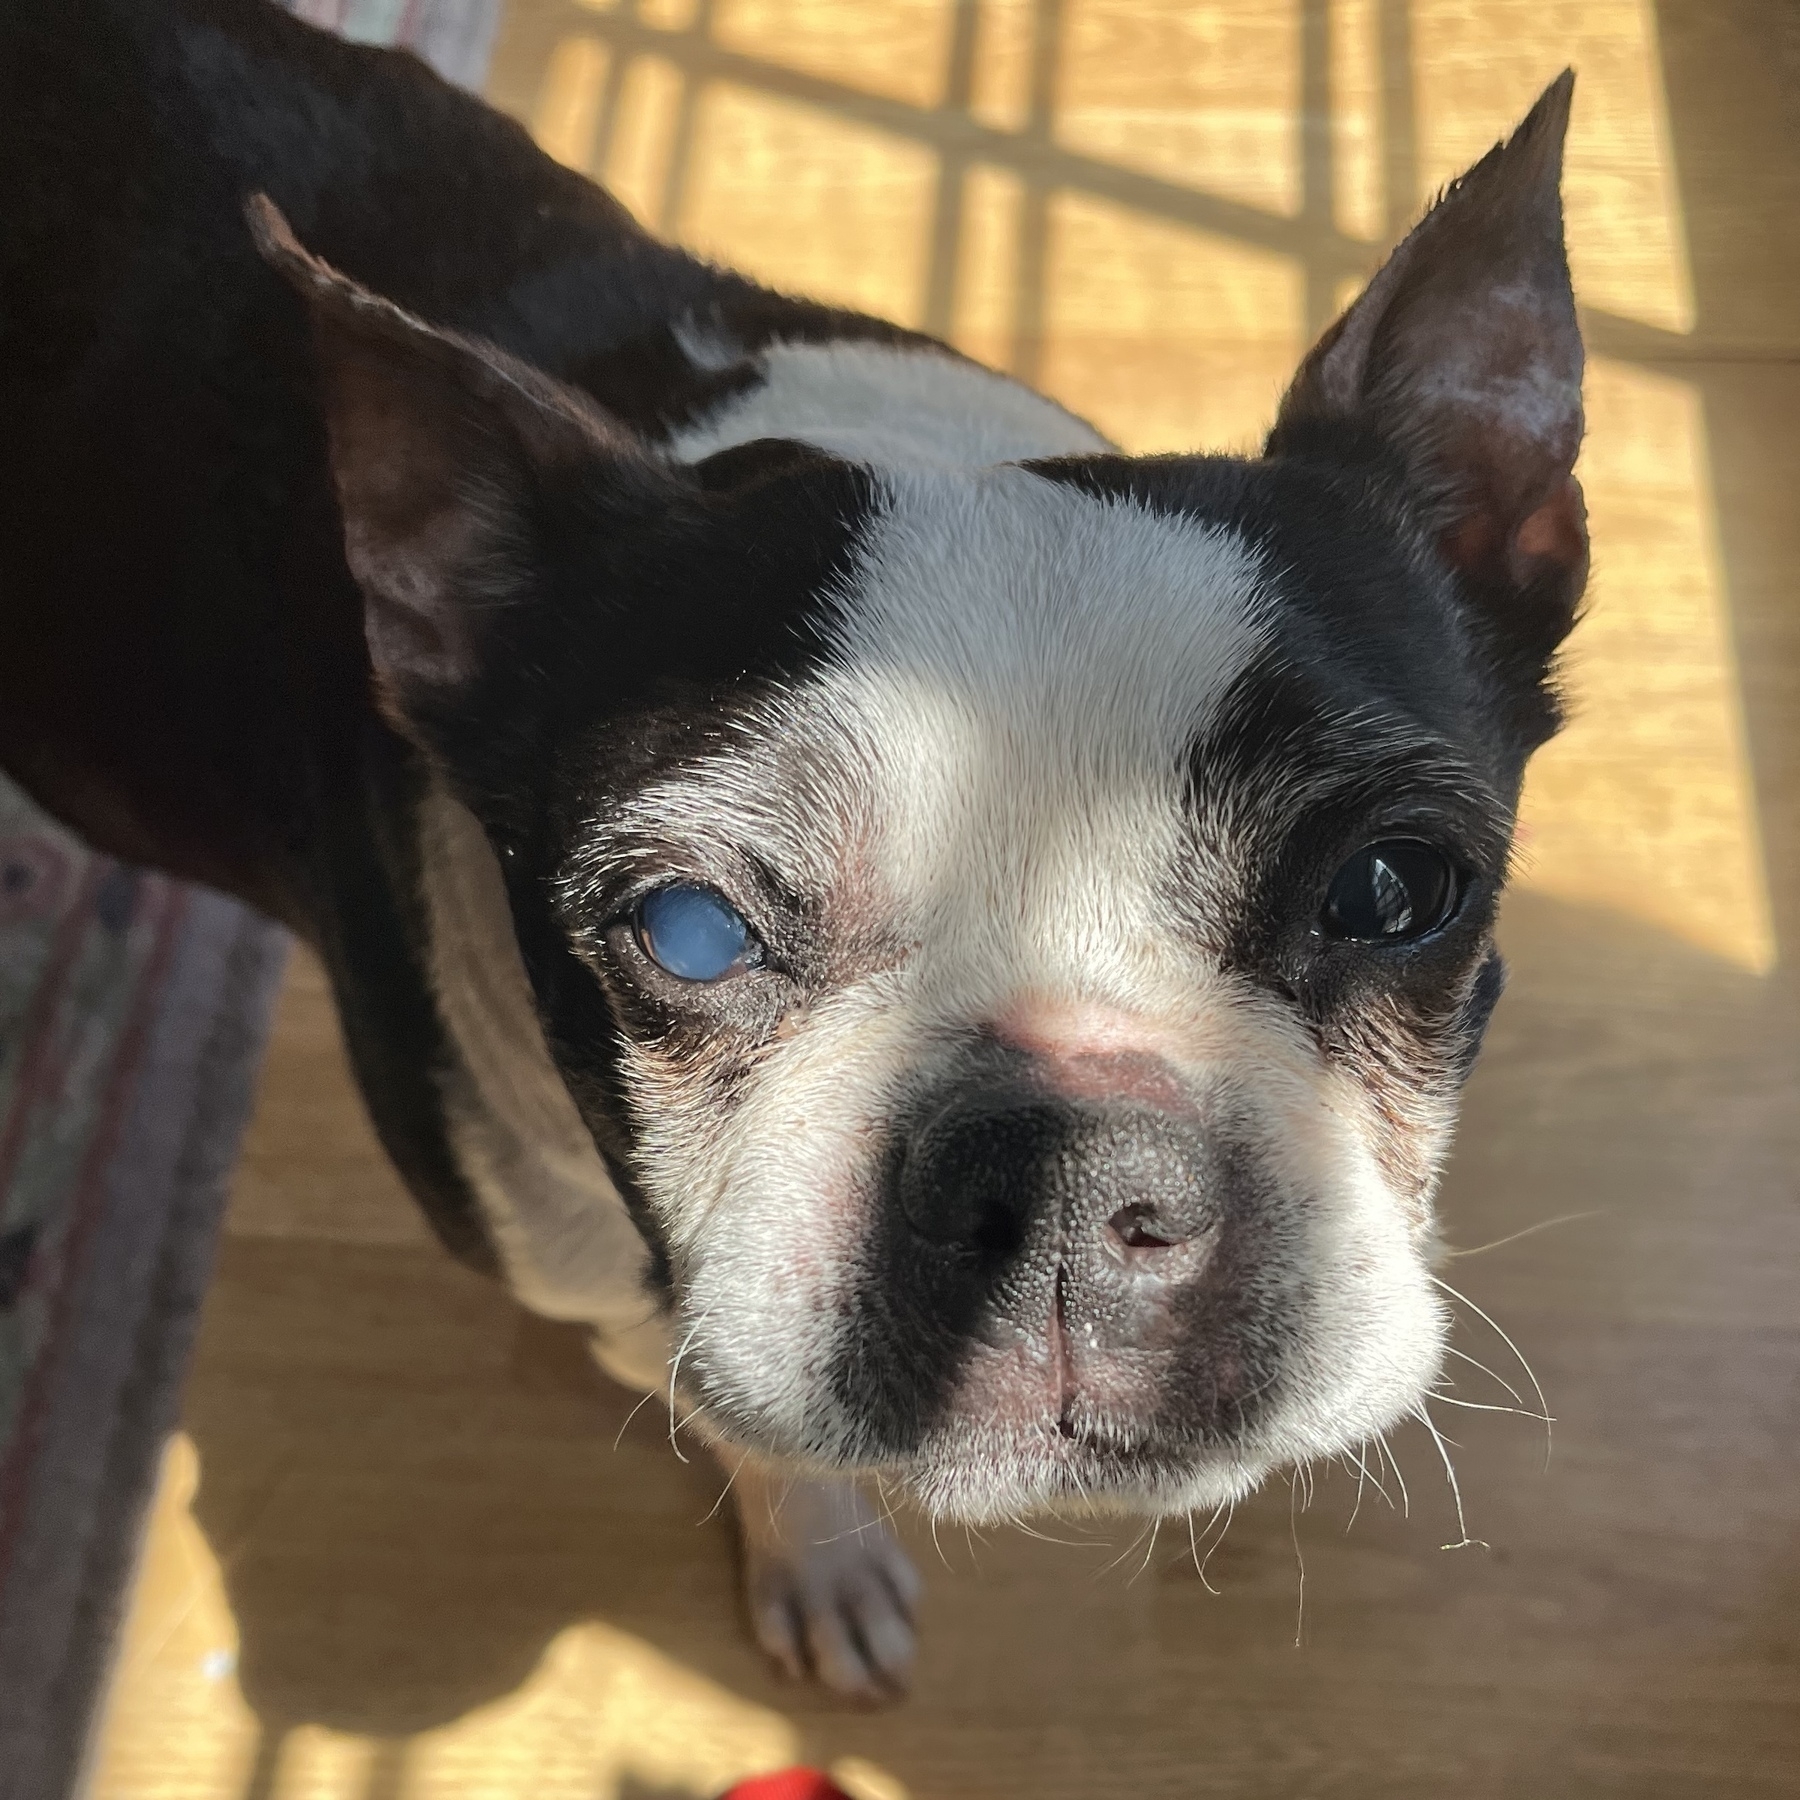 A Boston terrier with the sweetest little face is smiling up at the camera. She’s standing on a wood floor half in, half out of the sun streaming in through a door.